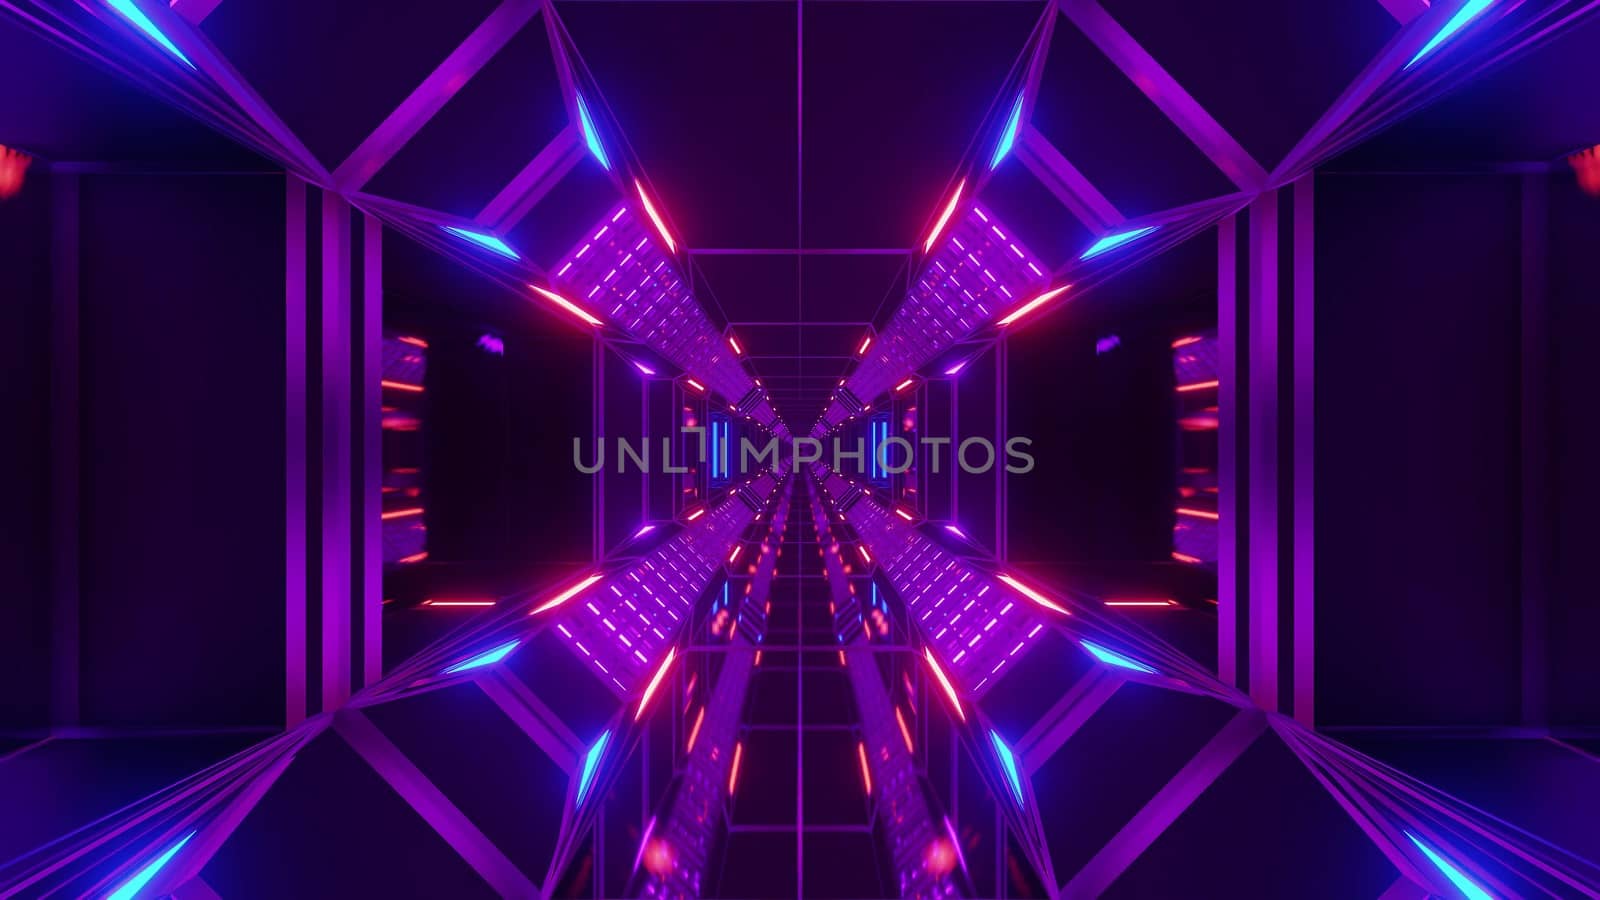 futuristic science-fiction tunnel corridor with metal steal wire-frame kontur and endless glowing lights 3d illustration background wallpaper graphic design, endless scifi space hangar with glass windows 3d rendering design